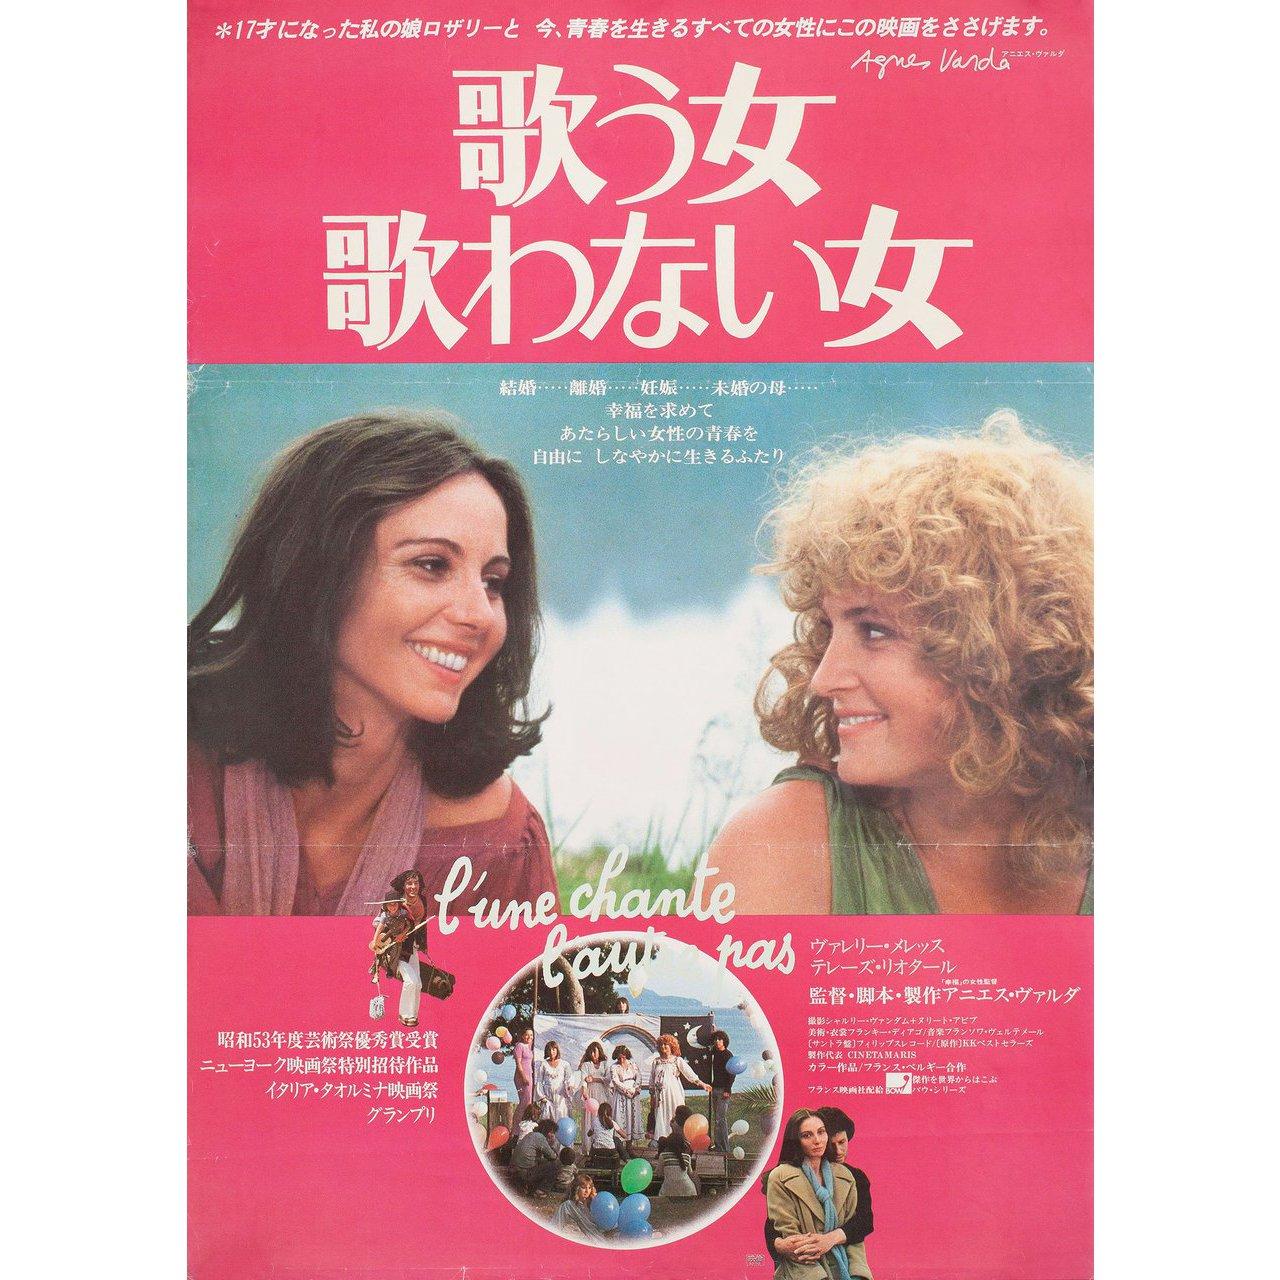 Original 1977 Japanese B2 poster for the film One Sings, the Other Doesn't (L'une chante, l'autre pas) directed by Agnes Varda with Therese Liotard / Valerie Mairesse / Robert Dadies / Mona Mairesse. Very good-fine condition, folded. Many original